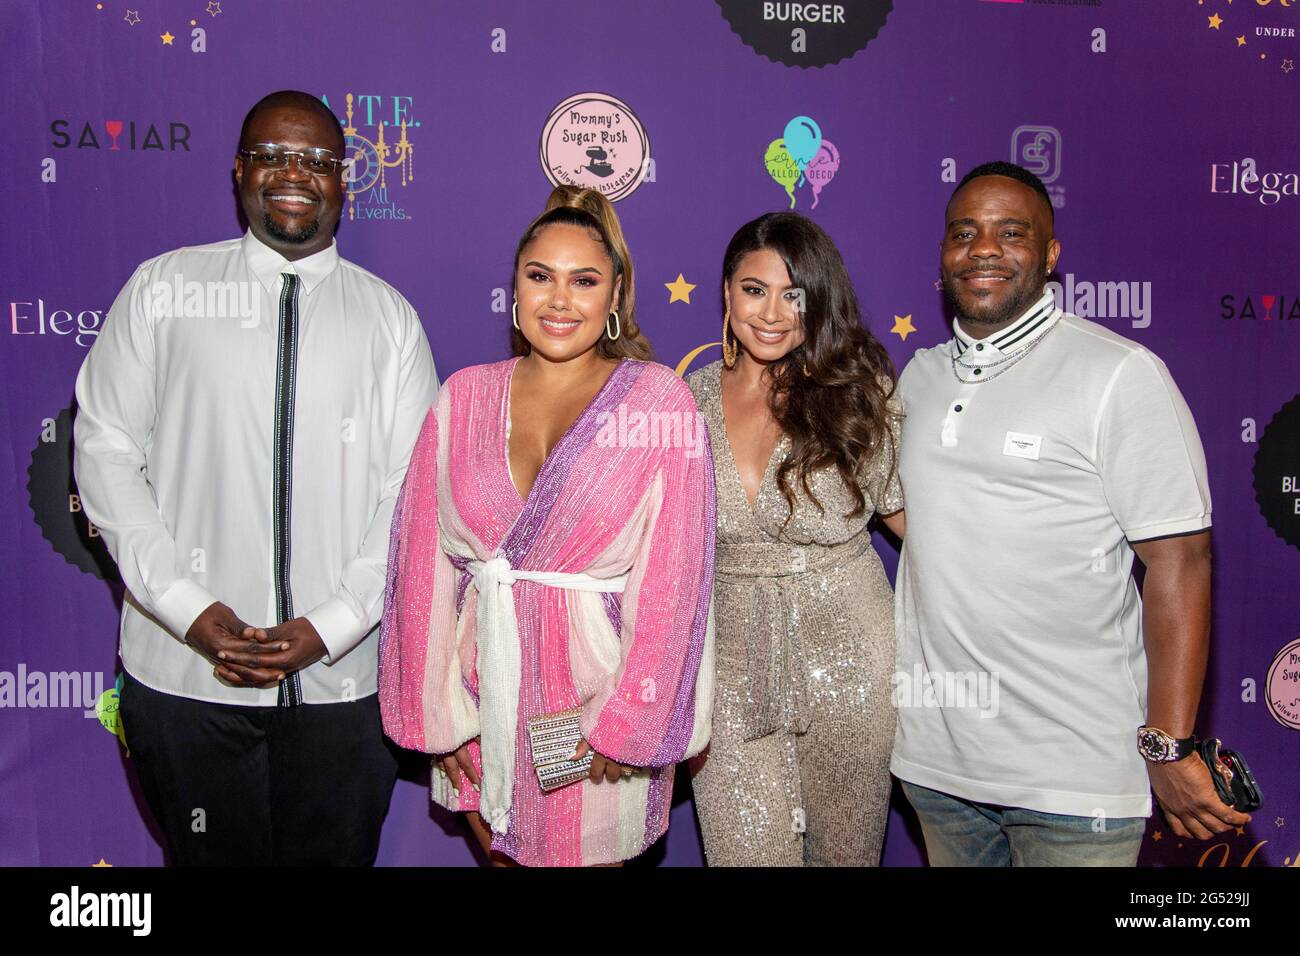 Los Angeles, USA. 24th June, 2021. PooBear, Kristinia DeBarge, Loureen Ayyoub, Adonis attend PooBear, Shndo and Loureen Ayyoub Music Video Premiere “Home of The Brave” at Black Star Burger, Los Angeles, CA on June 24, 2021 Credit: Eugene Powers/Alamy Live News Stock Photo